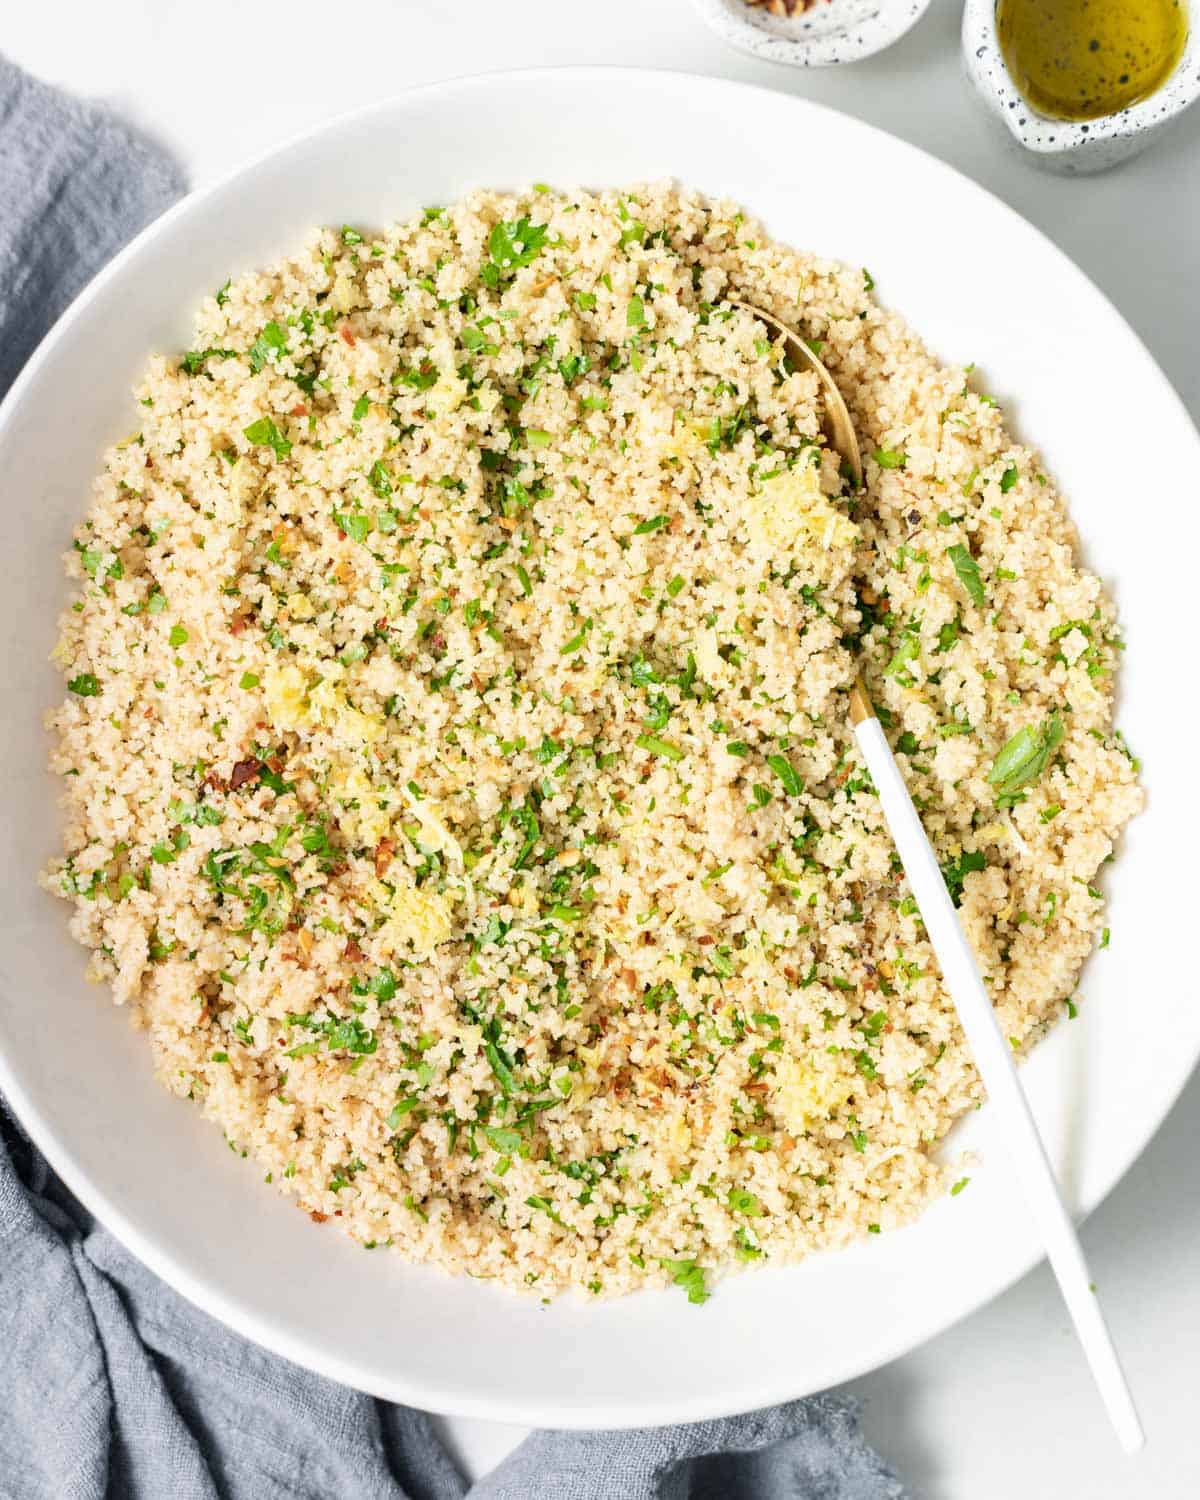 Couscous garnished with herbs and served with a large serving spoon.